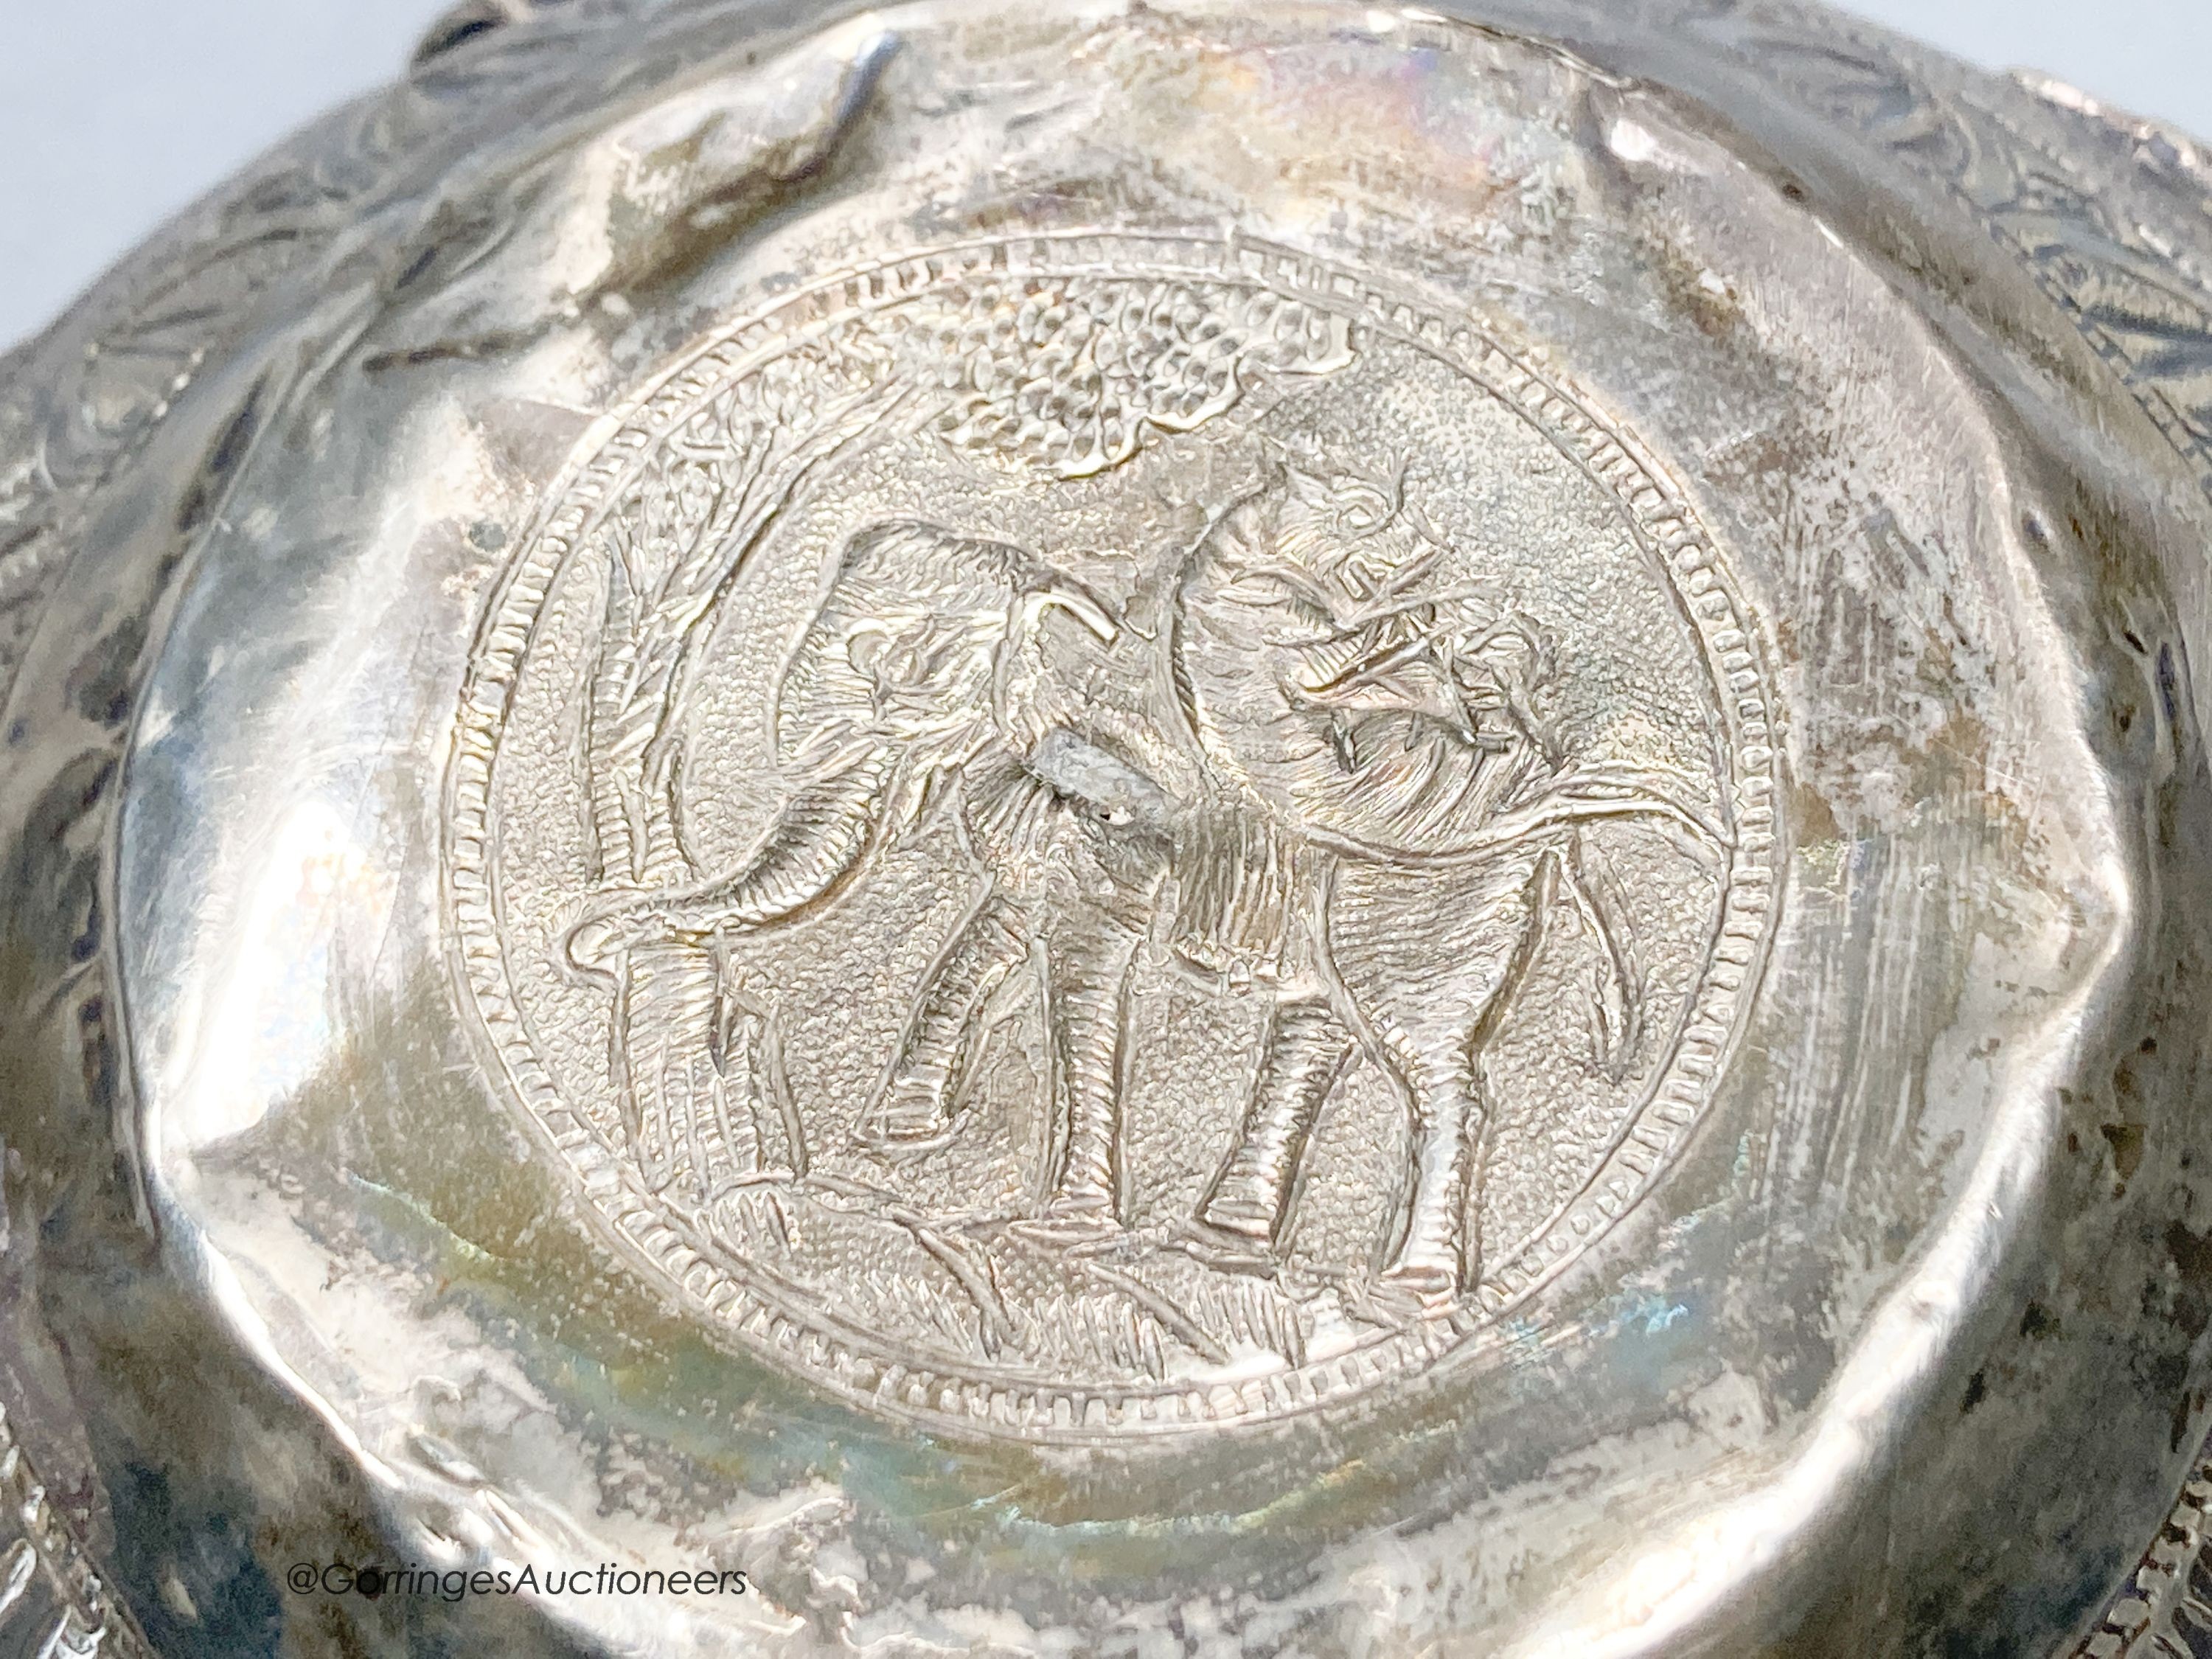 An Indian embossed white metal bowl, decorated with deities, height 8.5cm, 9oz.